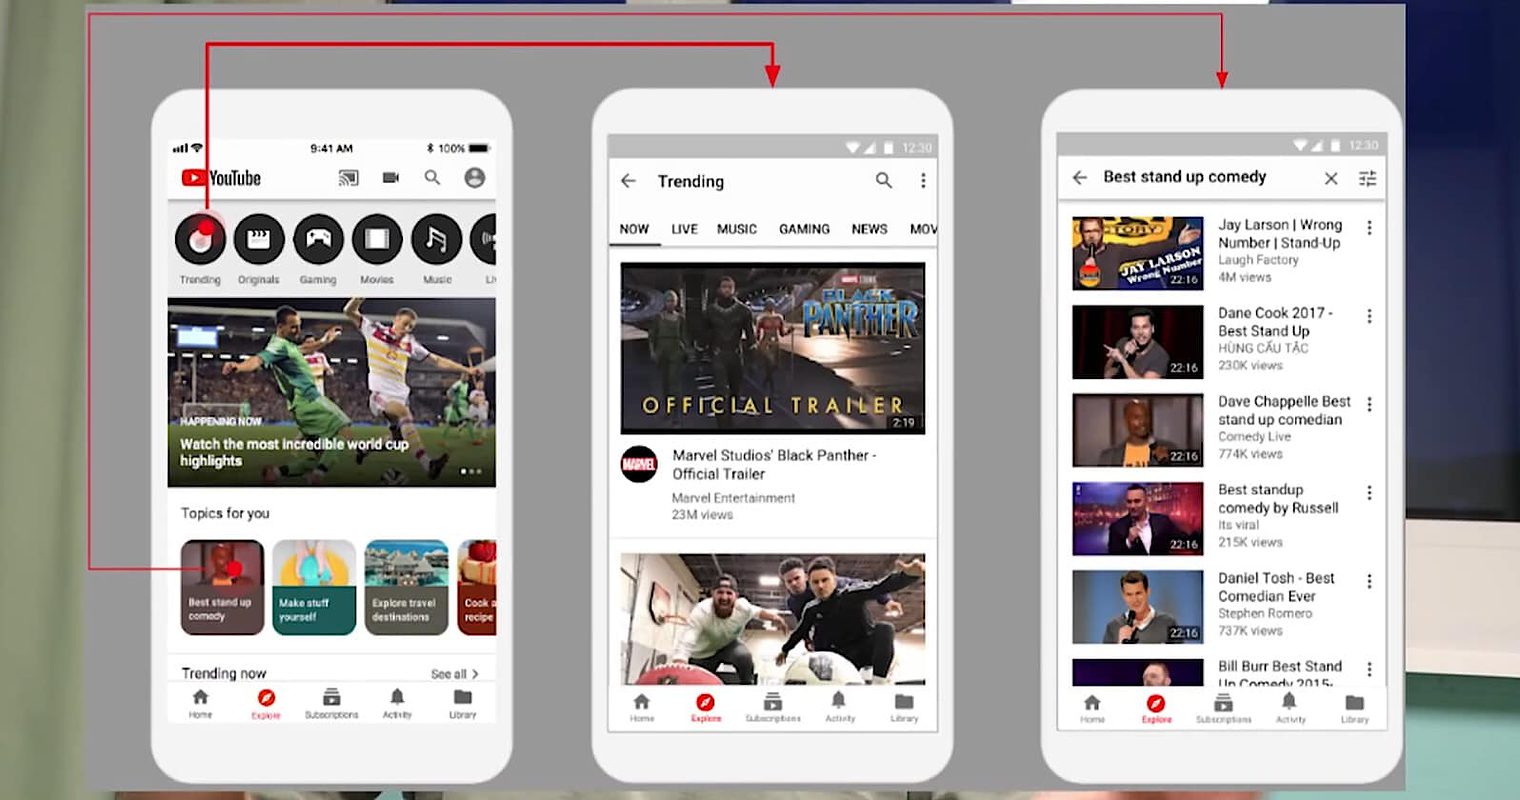 YouTube’s New ‘Explore’ Tab Helps Users Discover Videos Based on Viewing Activity